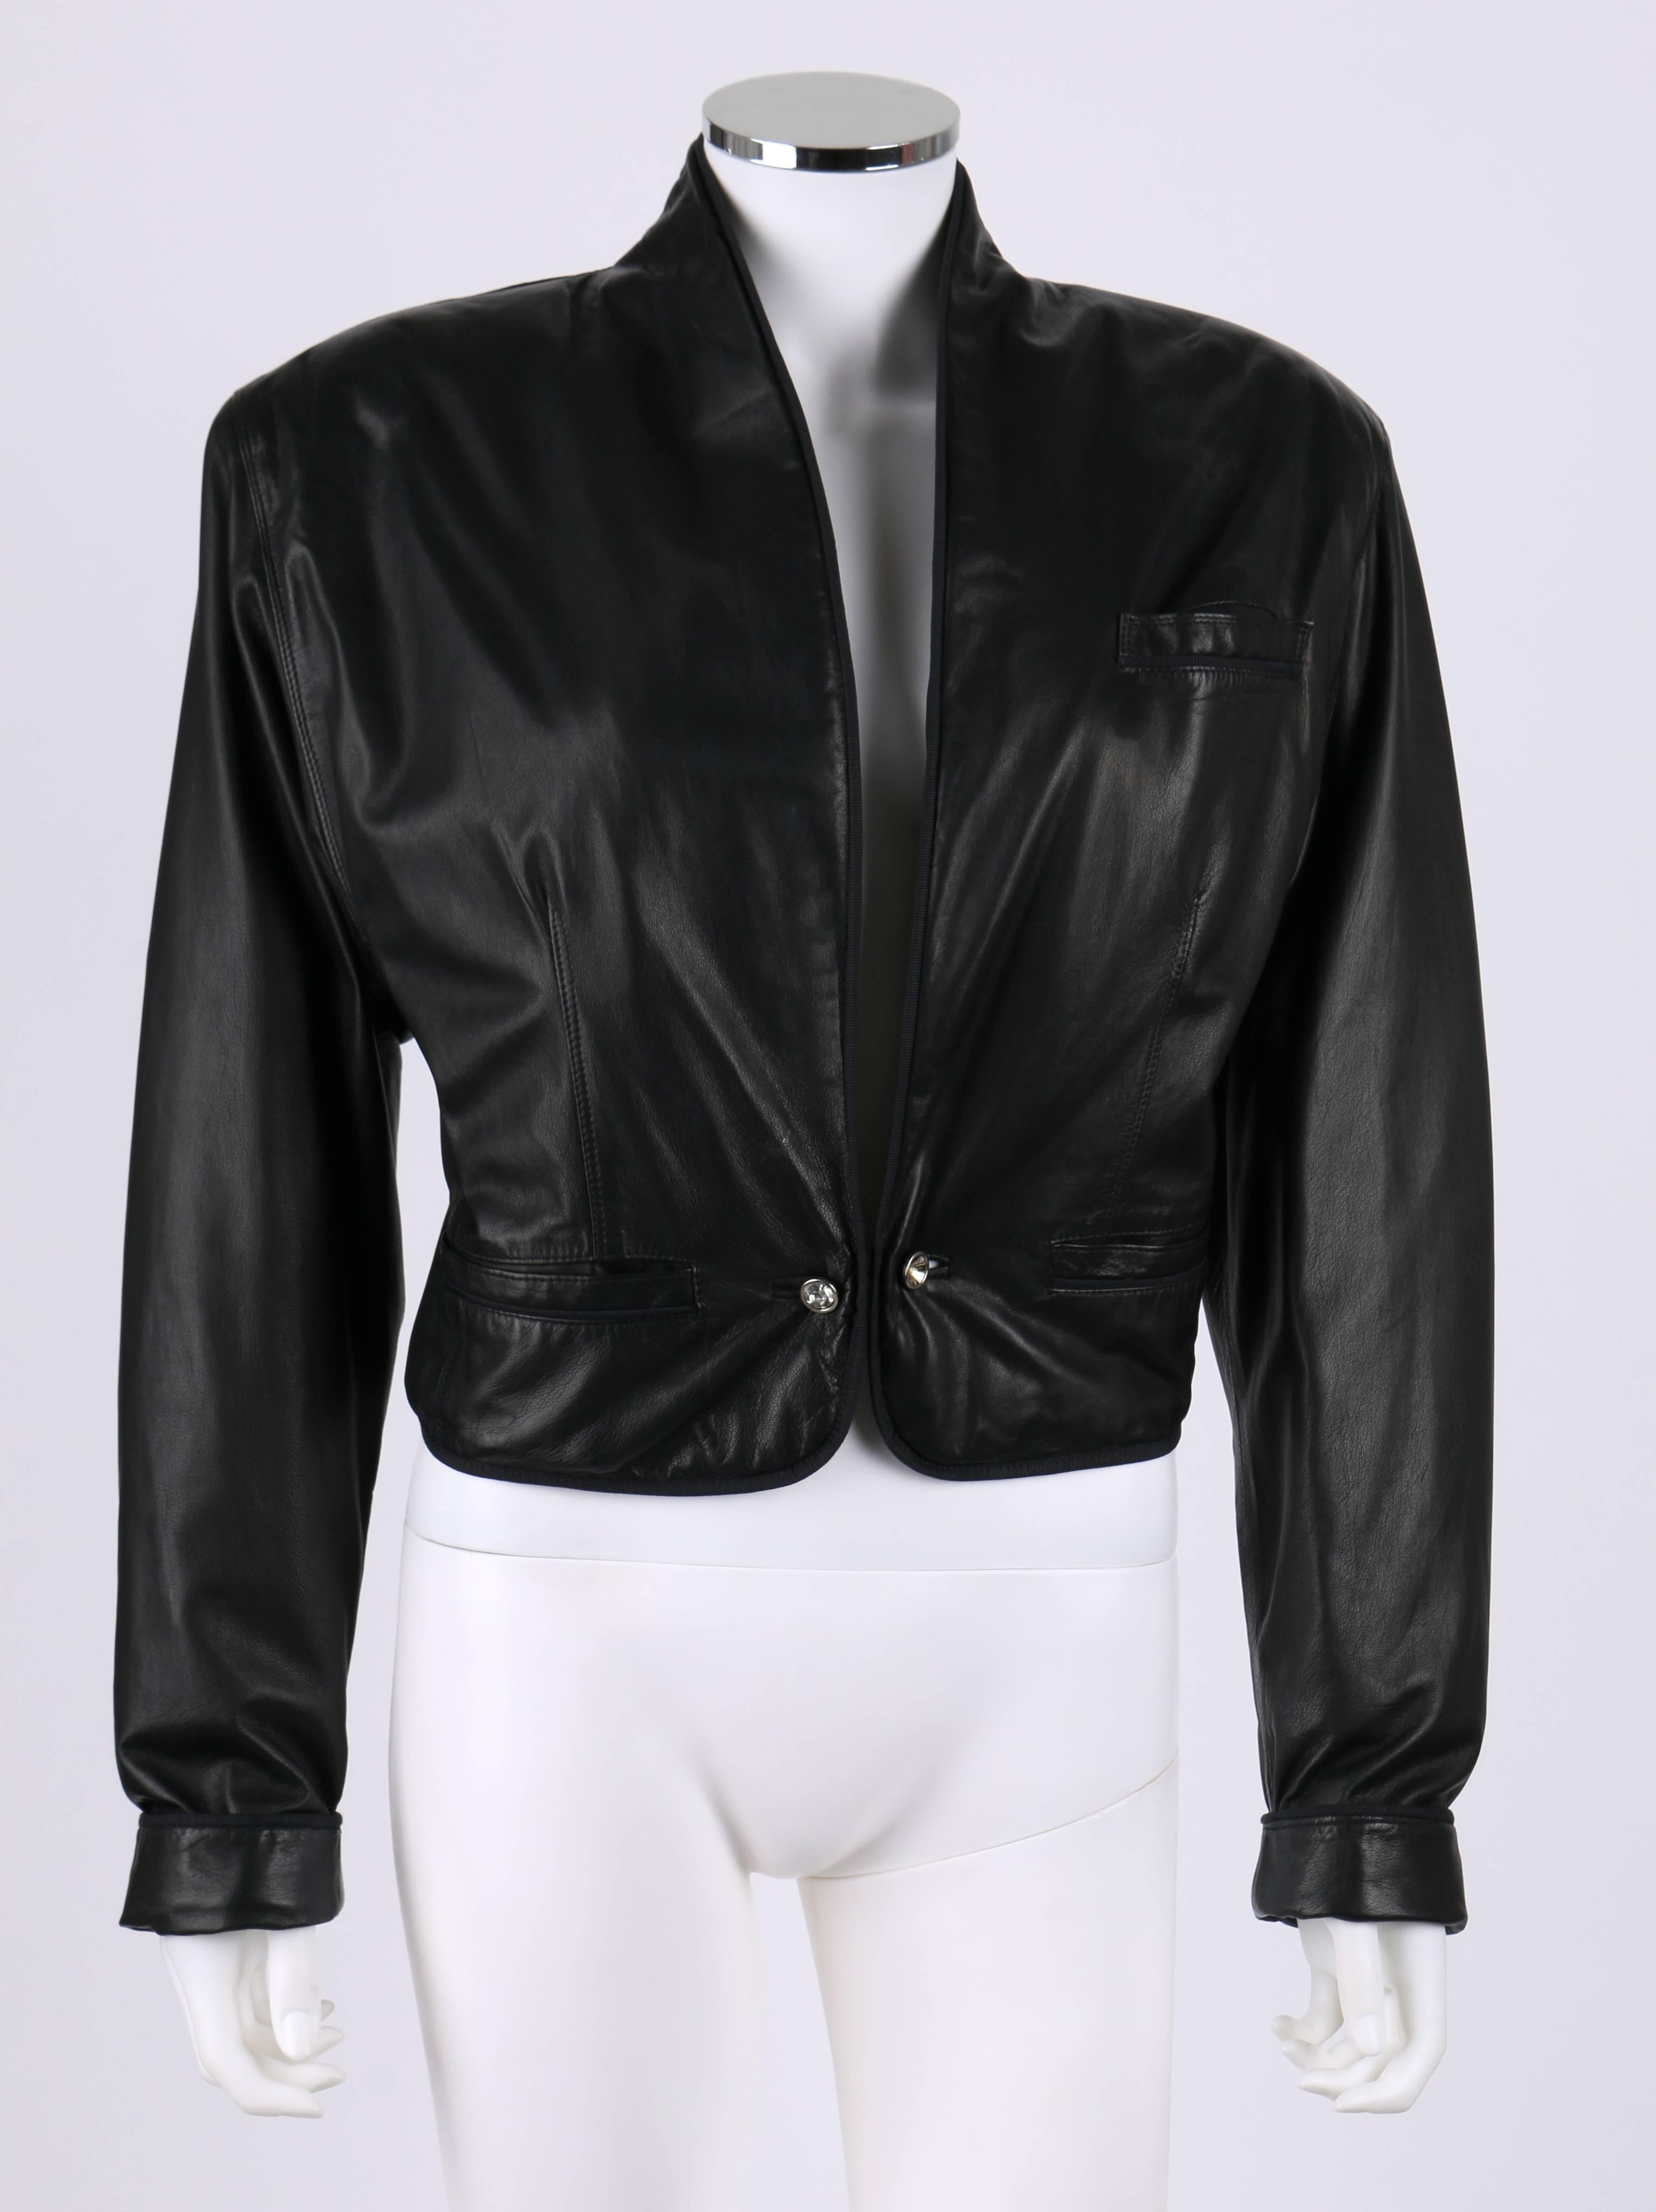 Gianni Versace c.1980's black leather cropped blazer jacket. Shoulder pads. Shawl collar. Silver-tone chain and rhinestone toggle closure. Fold over cuffs with rhinestone toggle fasteners. Two shallow single welt pockets adjacent to front closure.